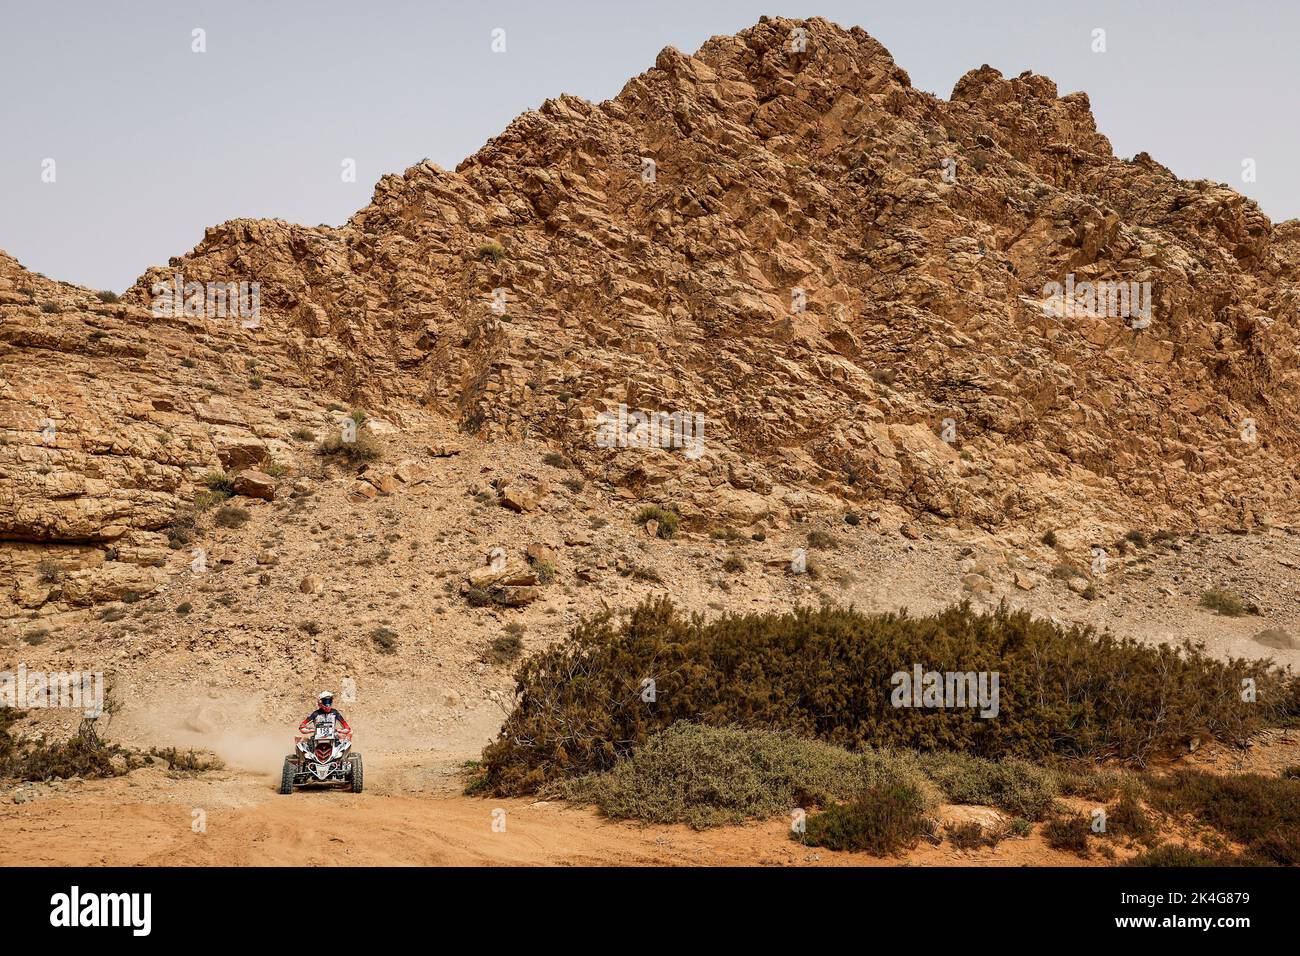 158 SANCHEZ Antoine (fra), SRR Sanchez Rallye Raid, Yamaha Raptor, action during the Stage 2 of the Rallye du Maroc 2022, 3rd round of the 2022 FIA World Rally-Raid Championship, on October 3, 2022 between Tan Tan and Laayoune, in Morocco - Photo Julien Delfosse / DPPI Stock Photo